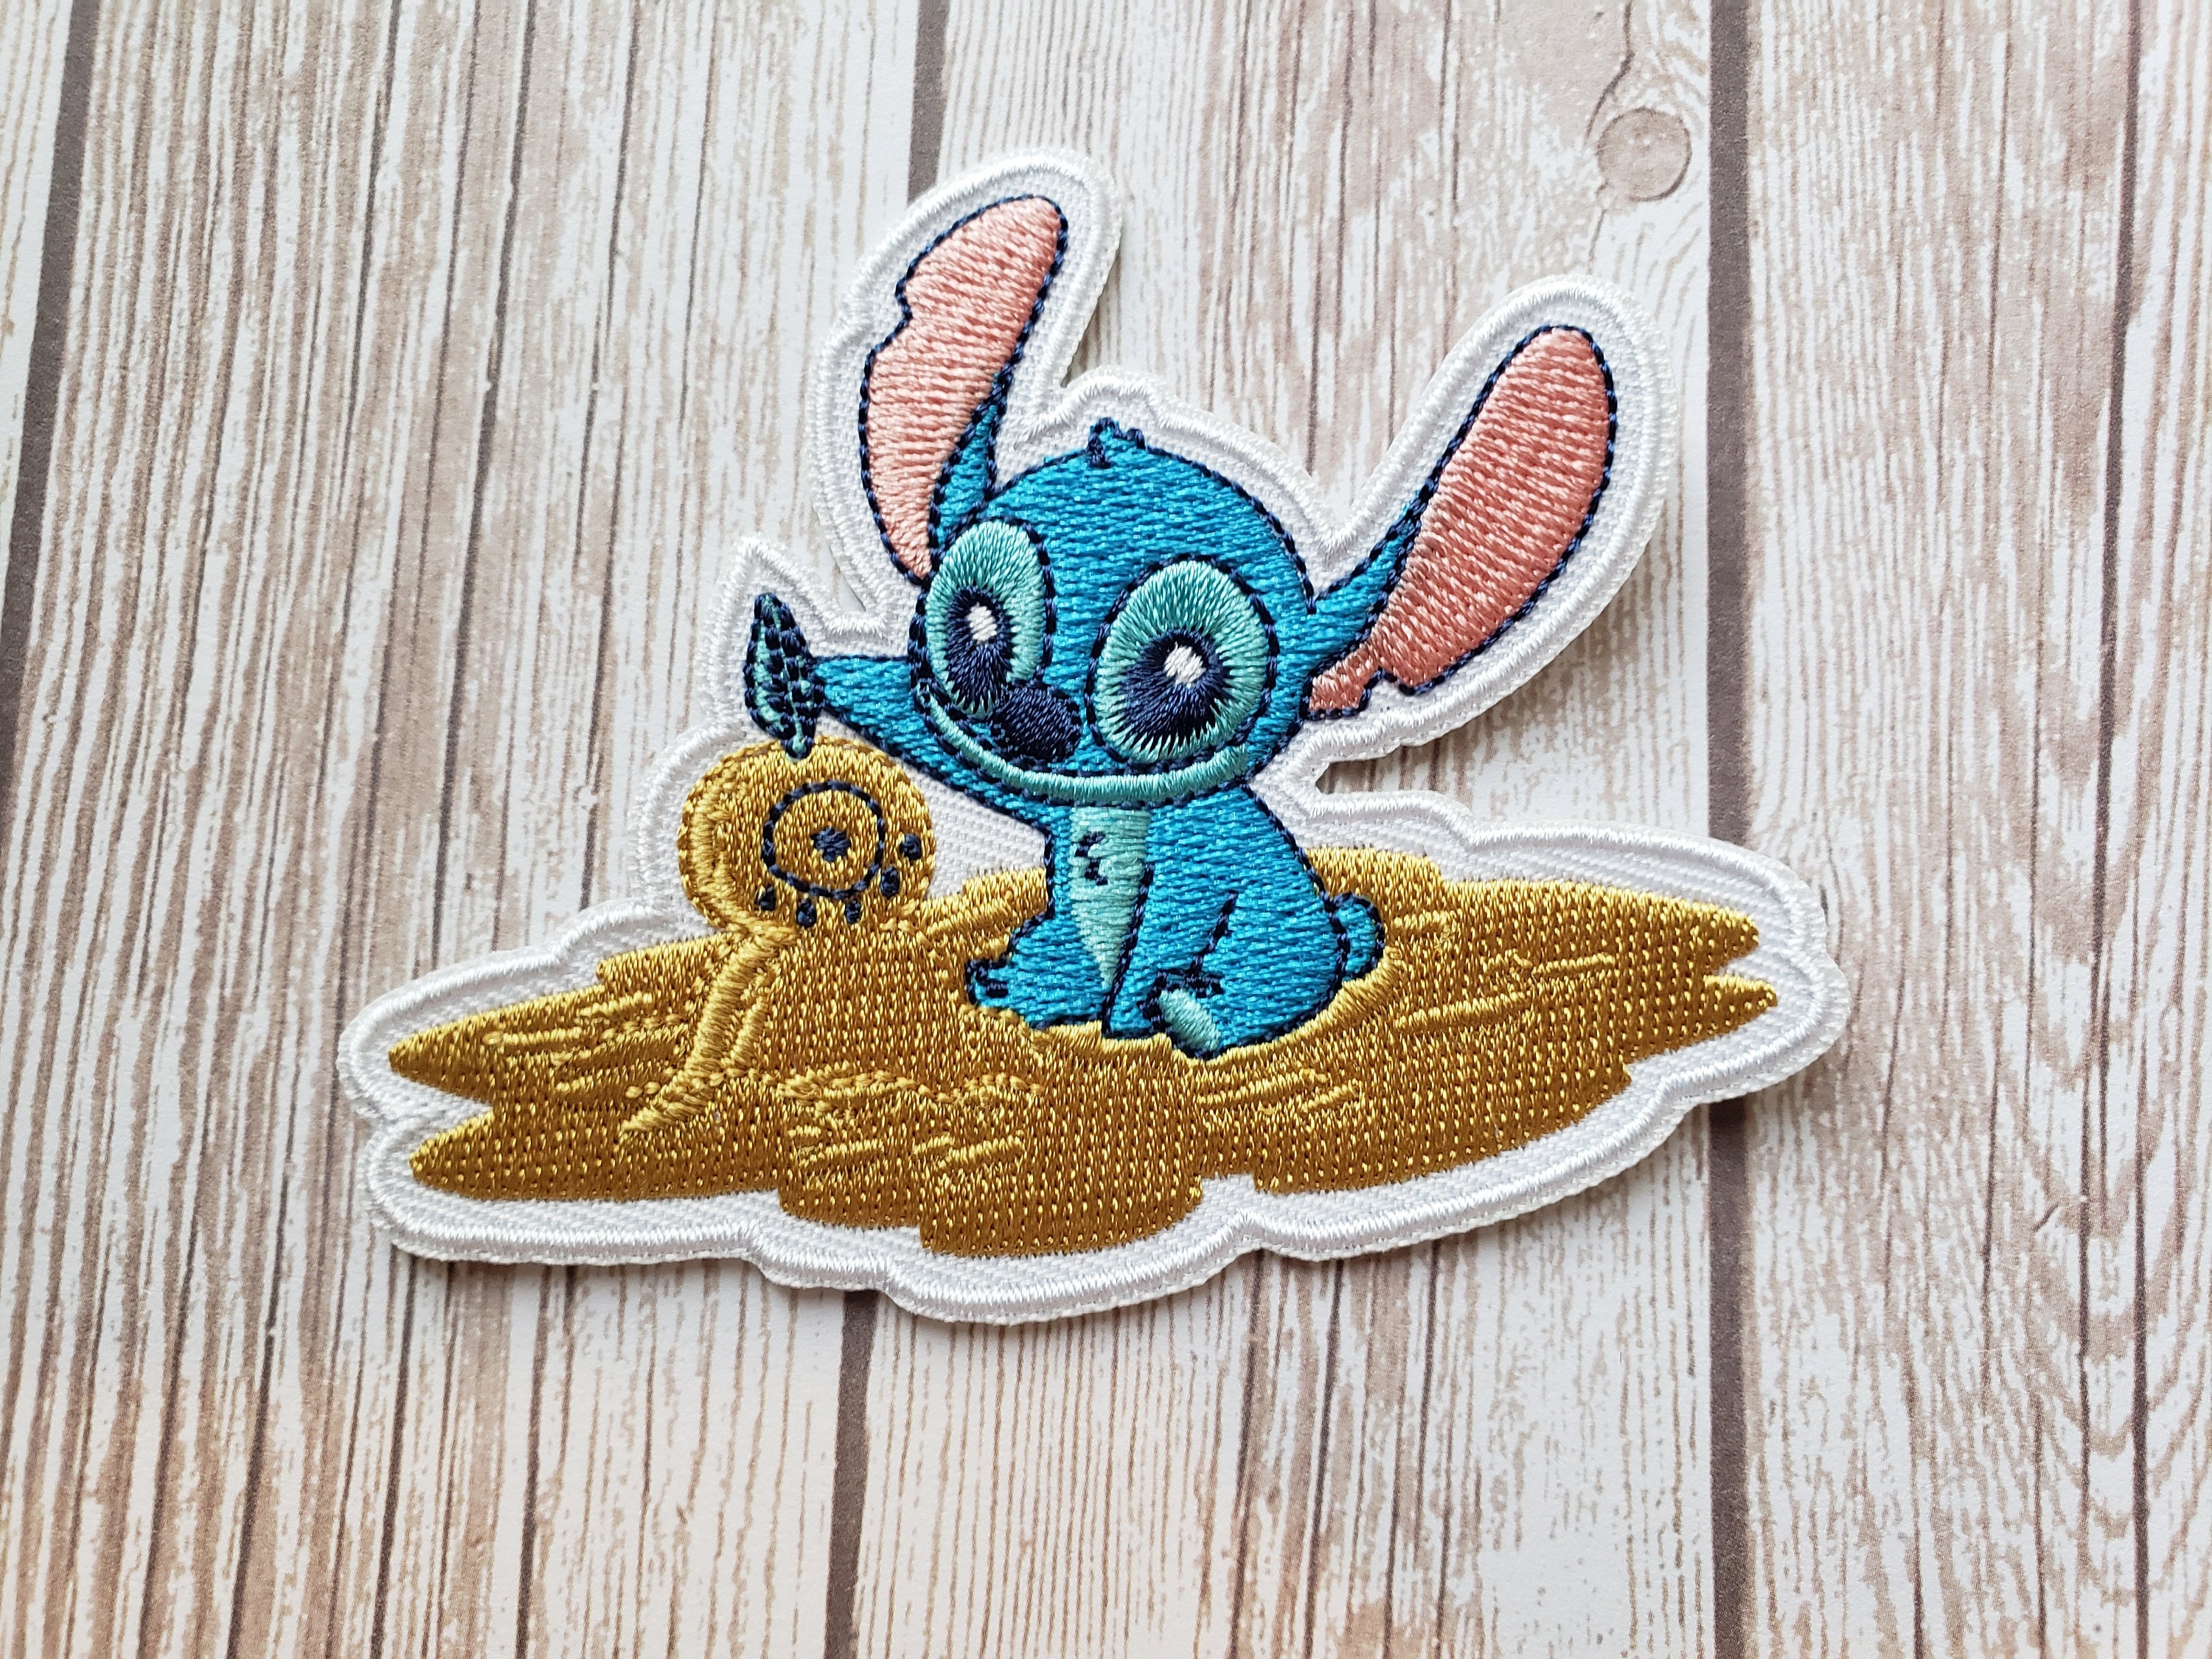 Buy Disney Lilo and Stitch Scrump Ohana Quote Character Disney Patches  Embroidered Patch / Iron on Patch / Clothes Material Patch Online in India  